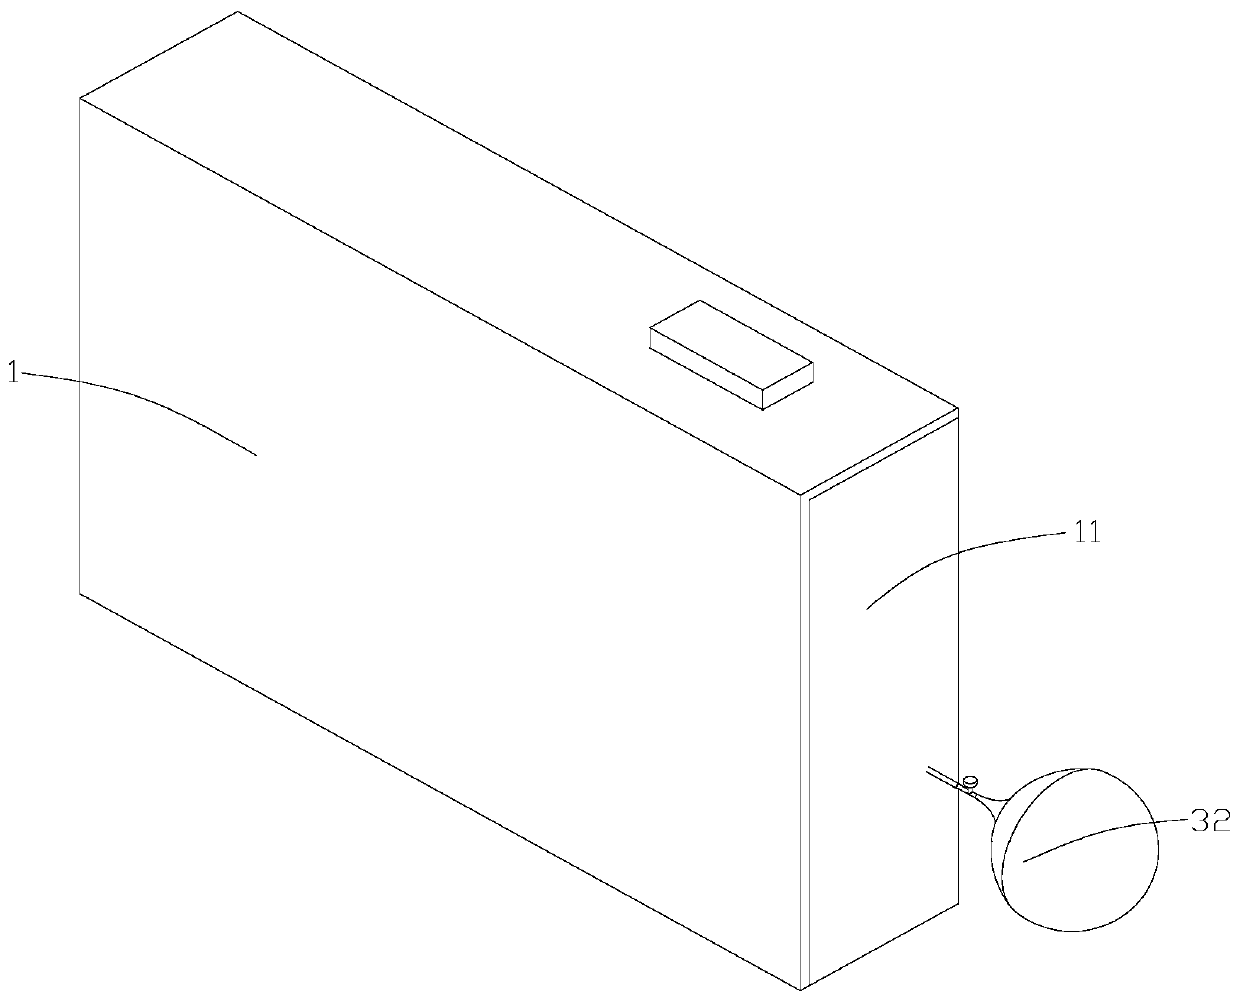 Spectacle lens assembly device convenient to fix